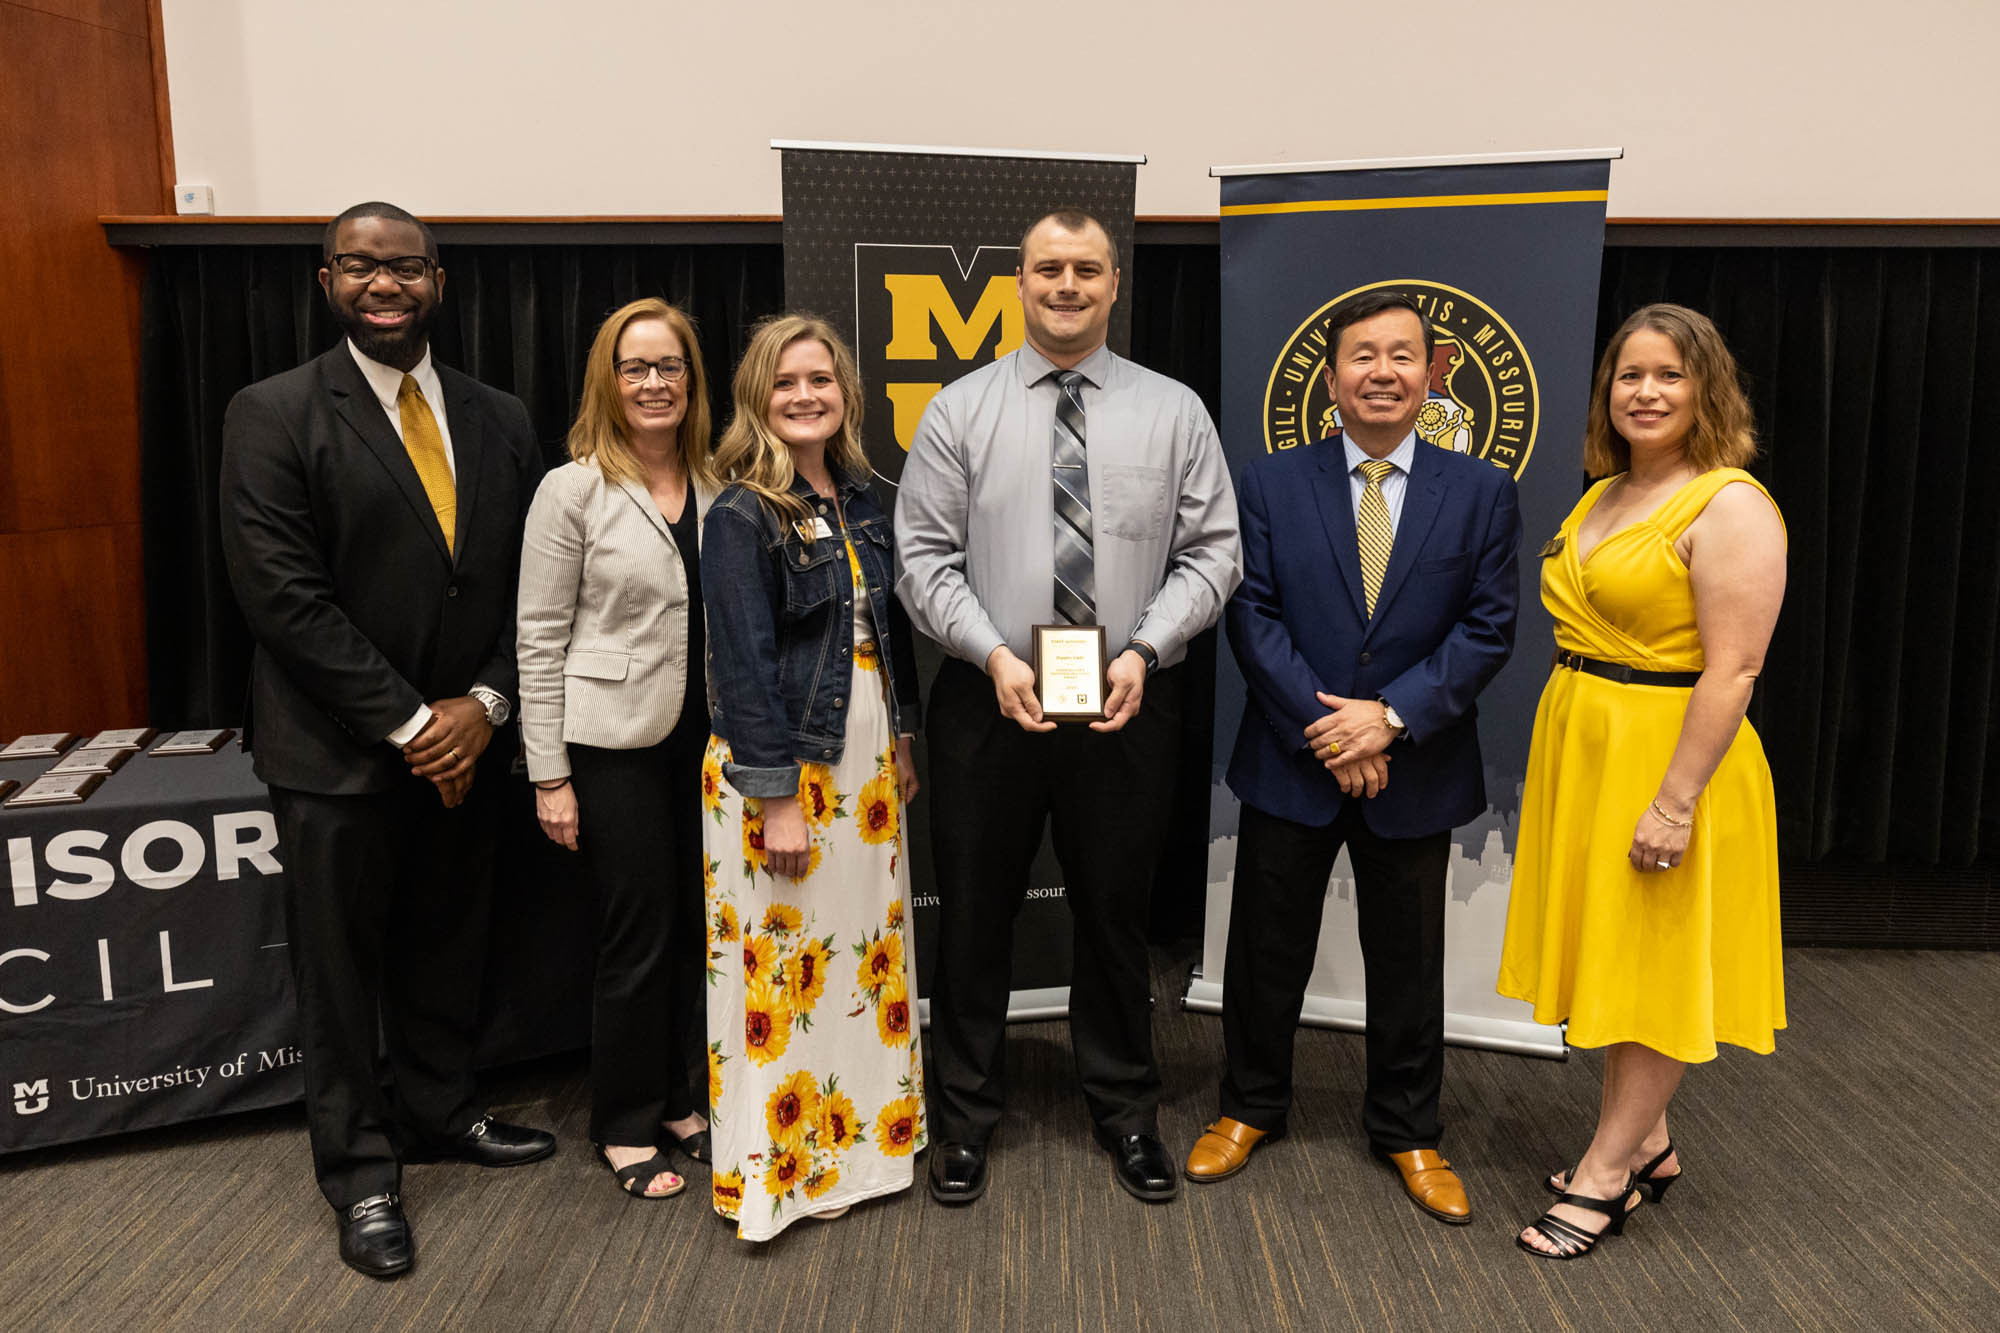 Chancellor’s Outstanding Staff Award – UM System: Dustin Oehl – Finance Service Center